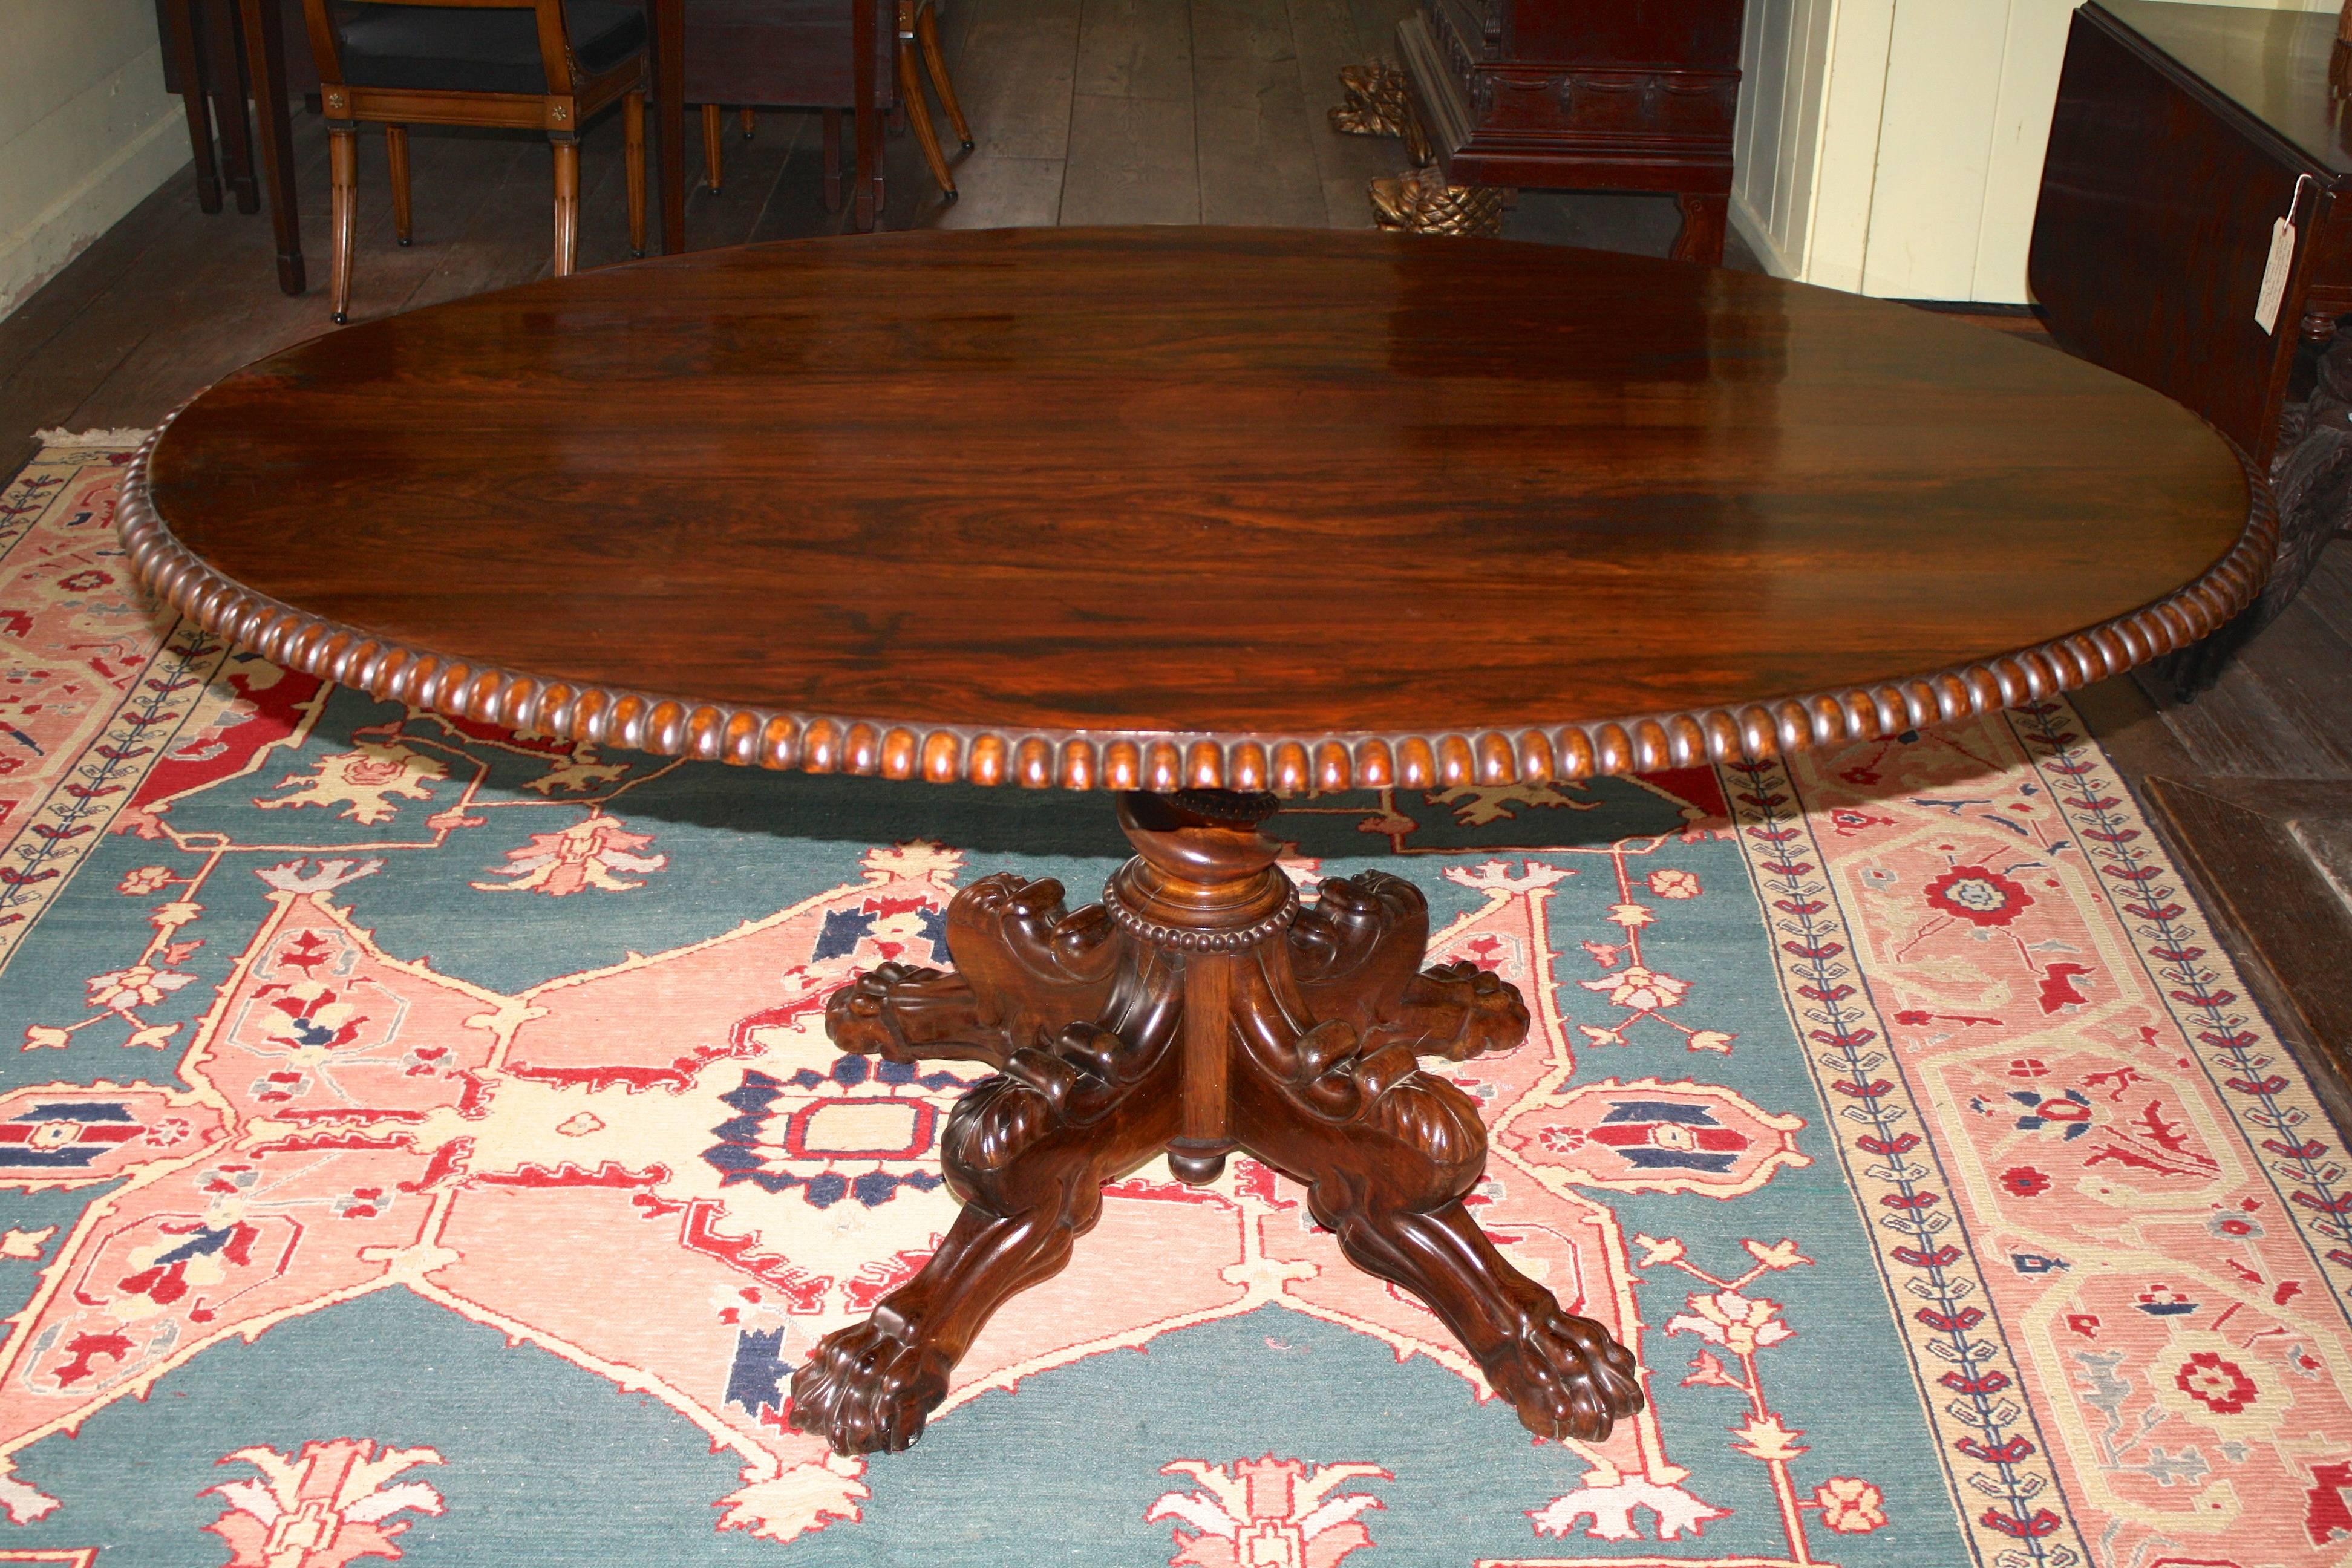 Grand and profusely hand-carved solid rosewood oval tilt-top center table, made in India during the reign of William IV; acquired by British watercolorist C. Bigot whose stamp is impressed on the table's block. (Image #9) Bigot created a series of